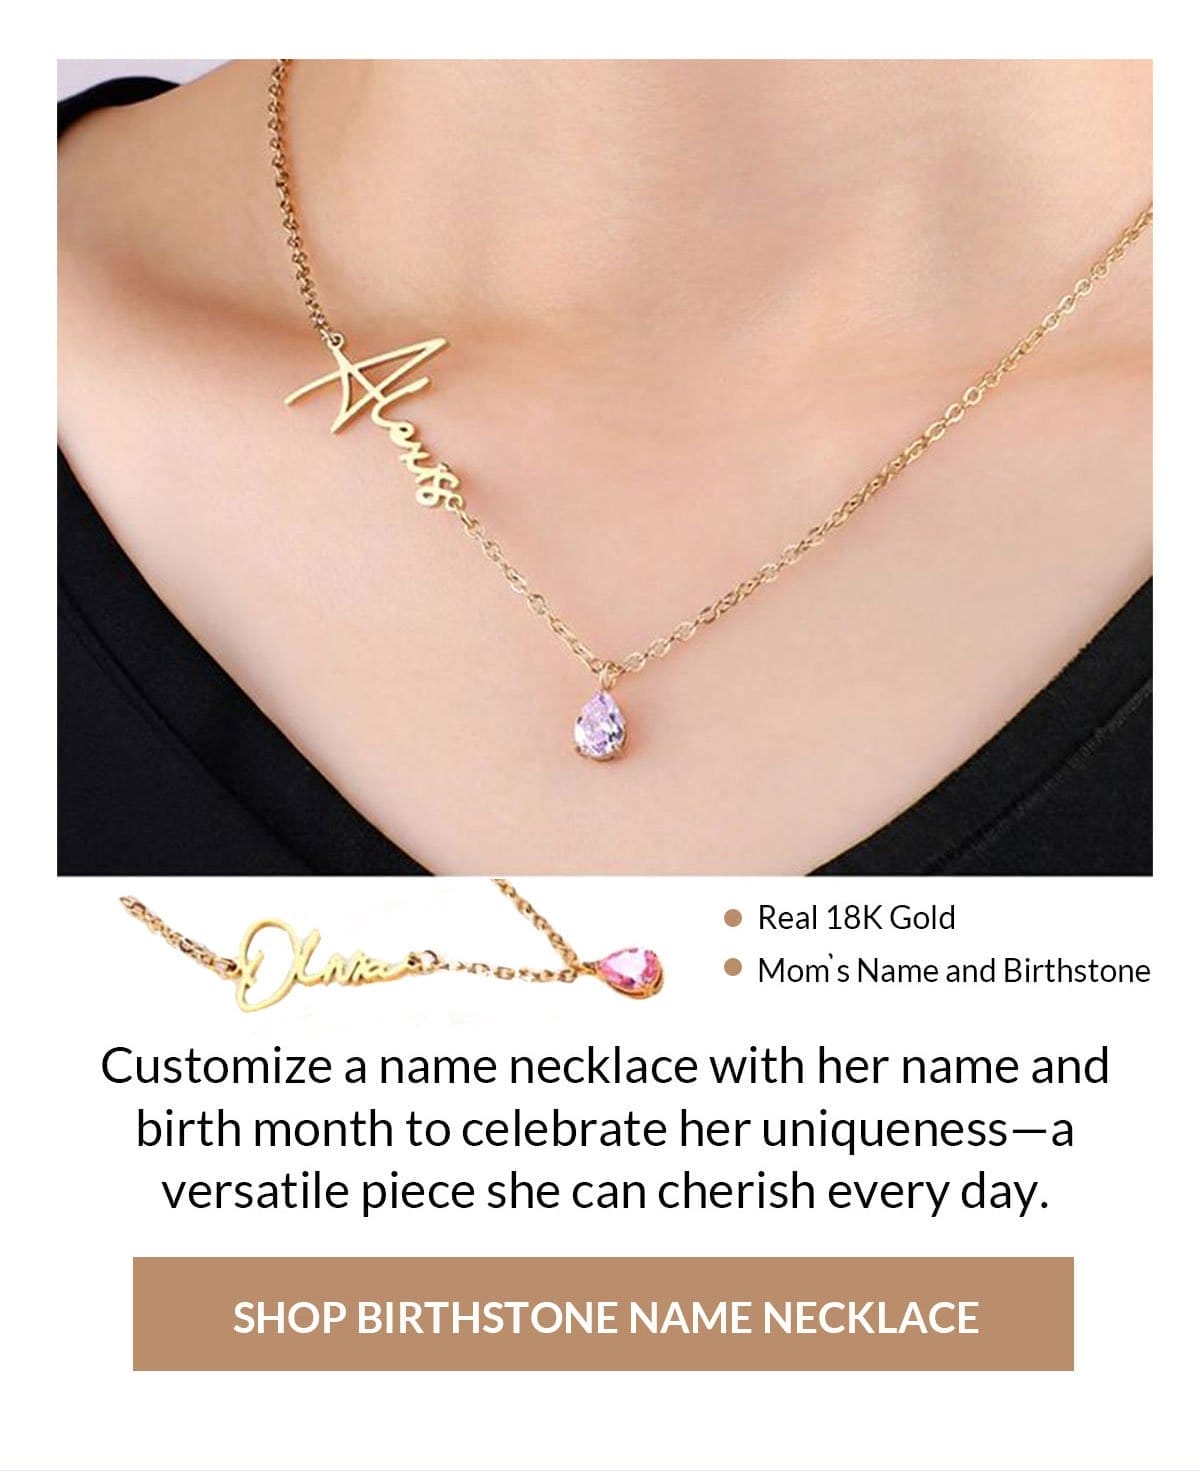 Shop Birthstone Name Necklace